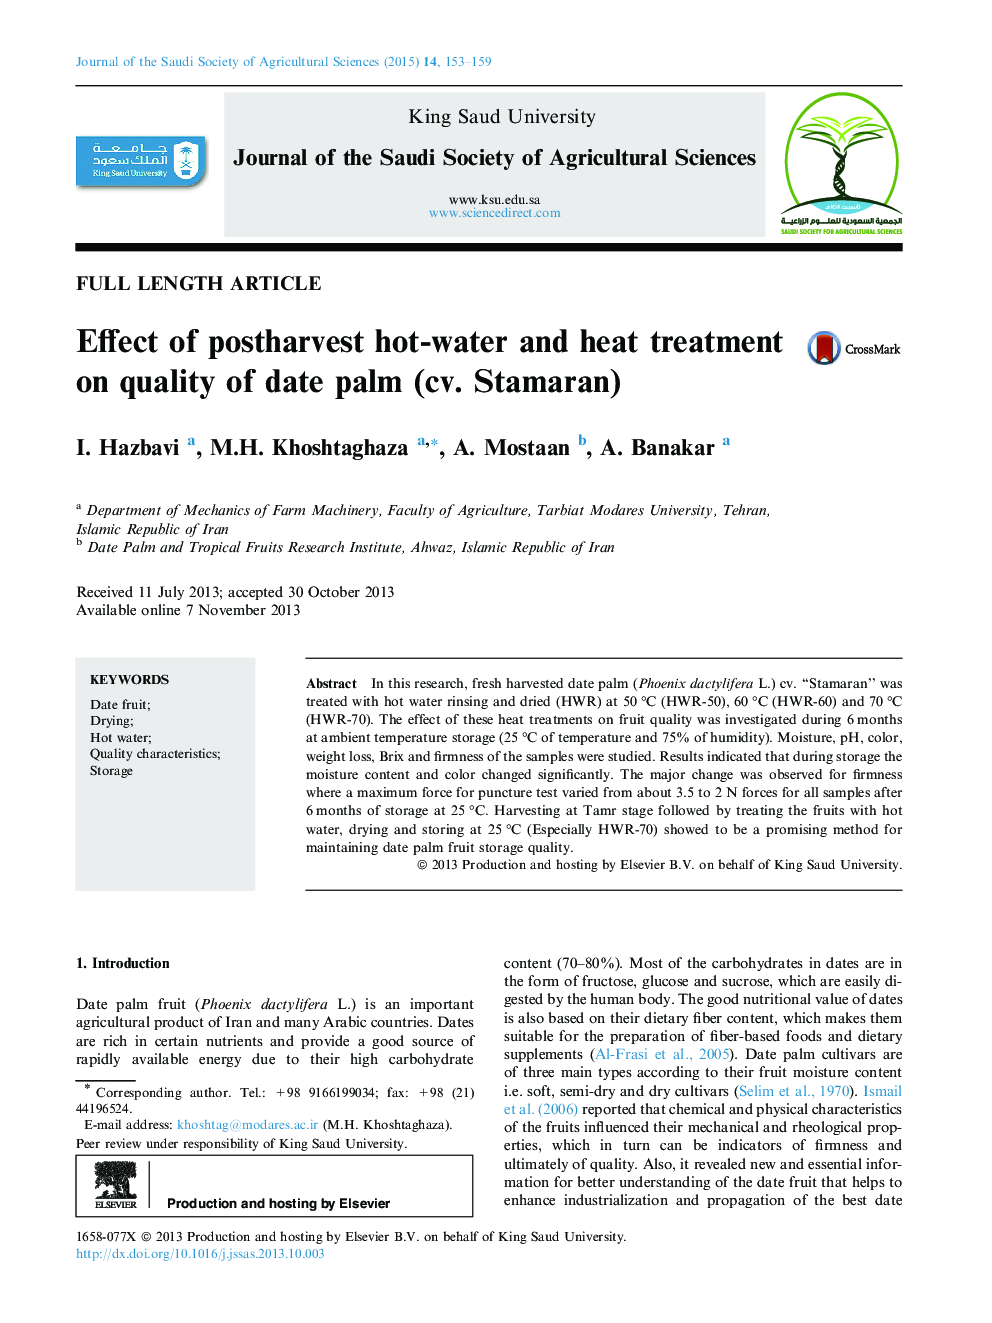 Effect of postharvest hot-water and heat treatment on quality of date palm (cv. Stamaran) 